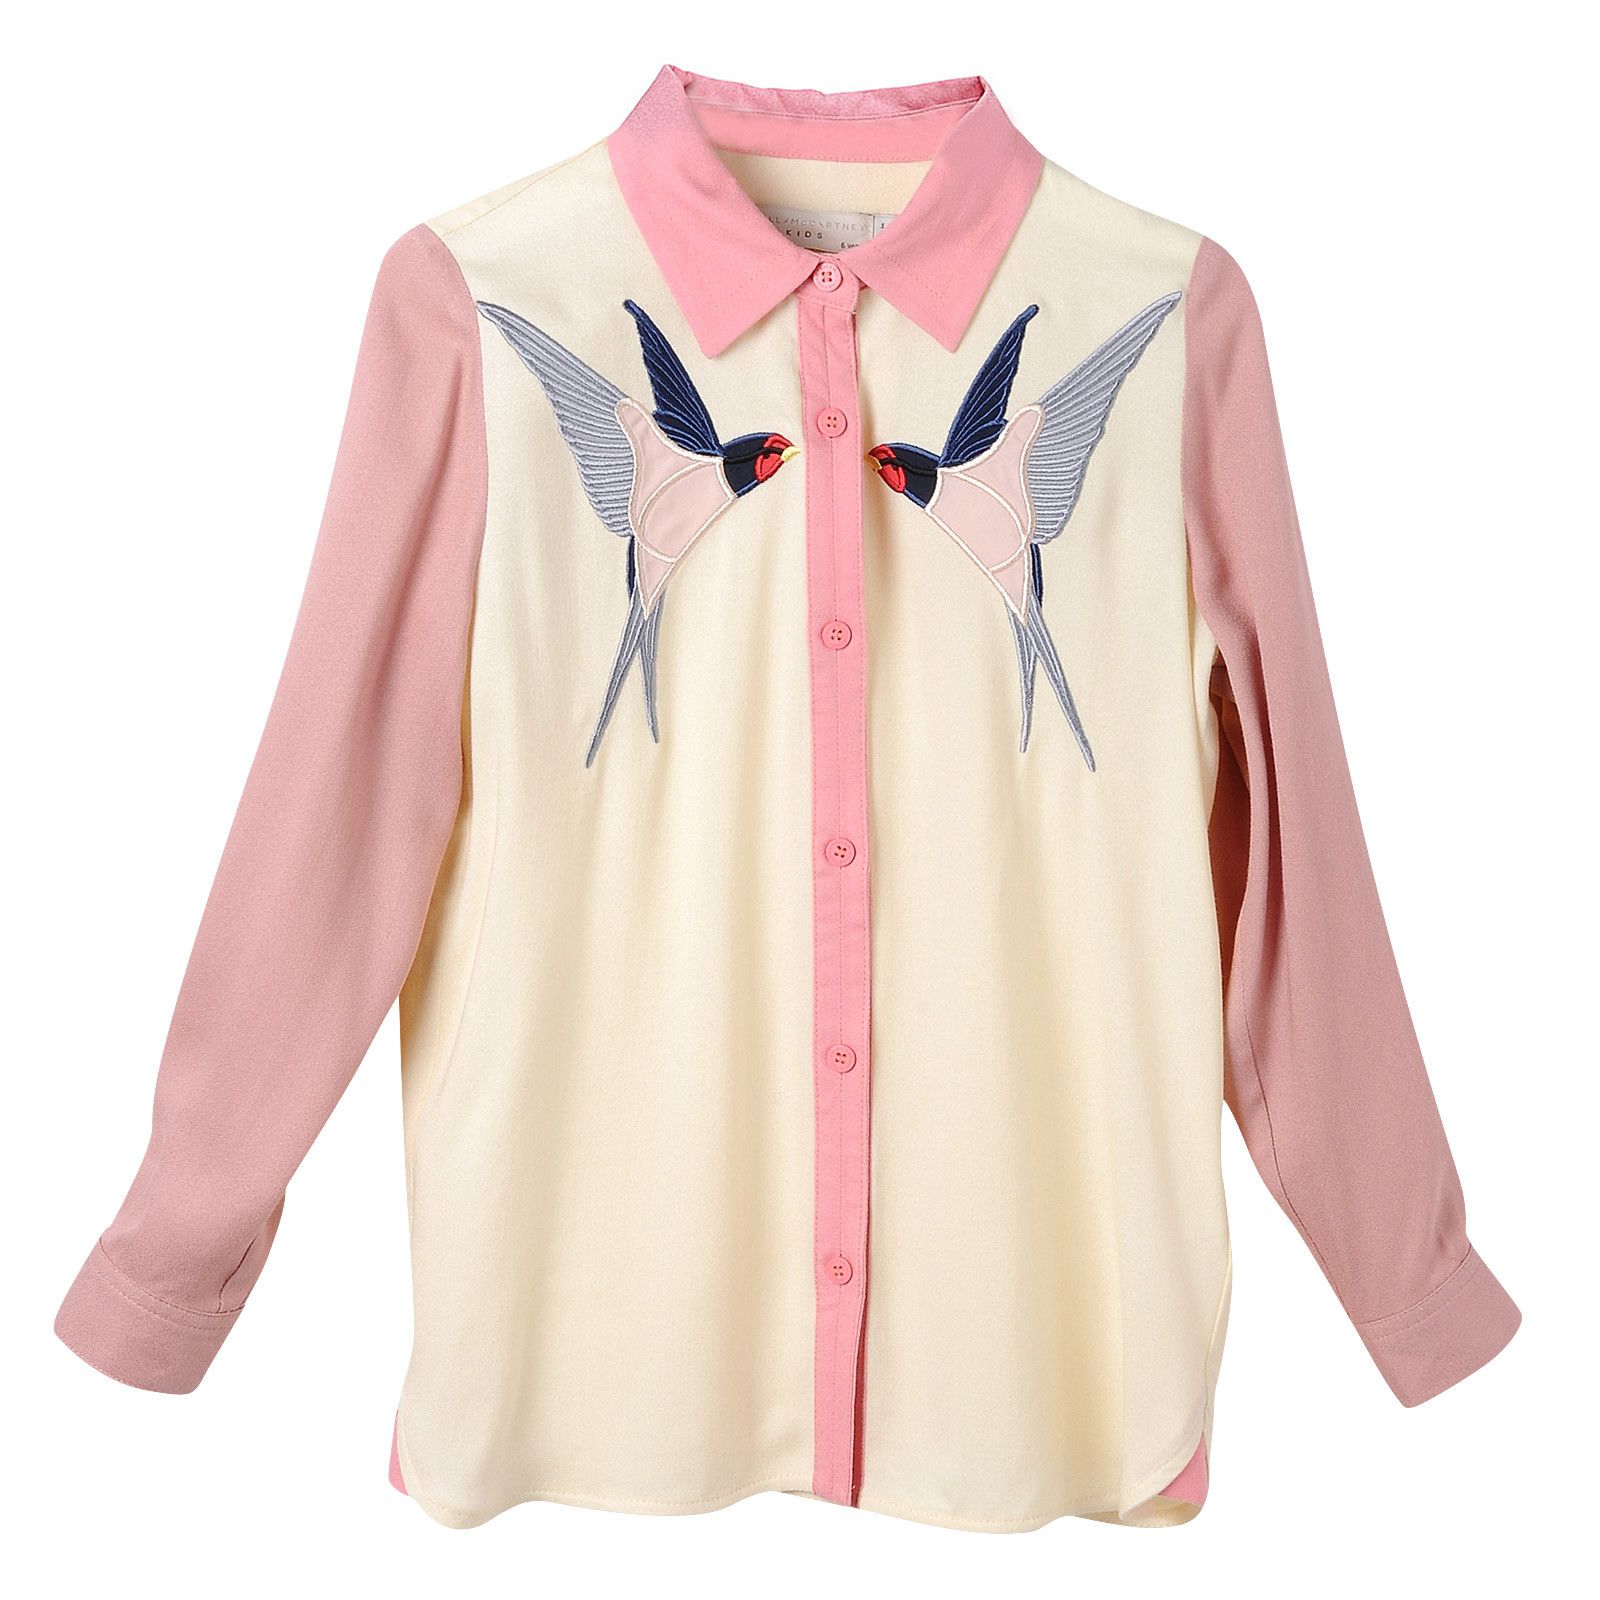 Girls Pink Bird Embroidered Trims Blouse With Pointed Collar - CÉMAROSE | Children's Fashion Store - 1